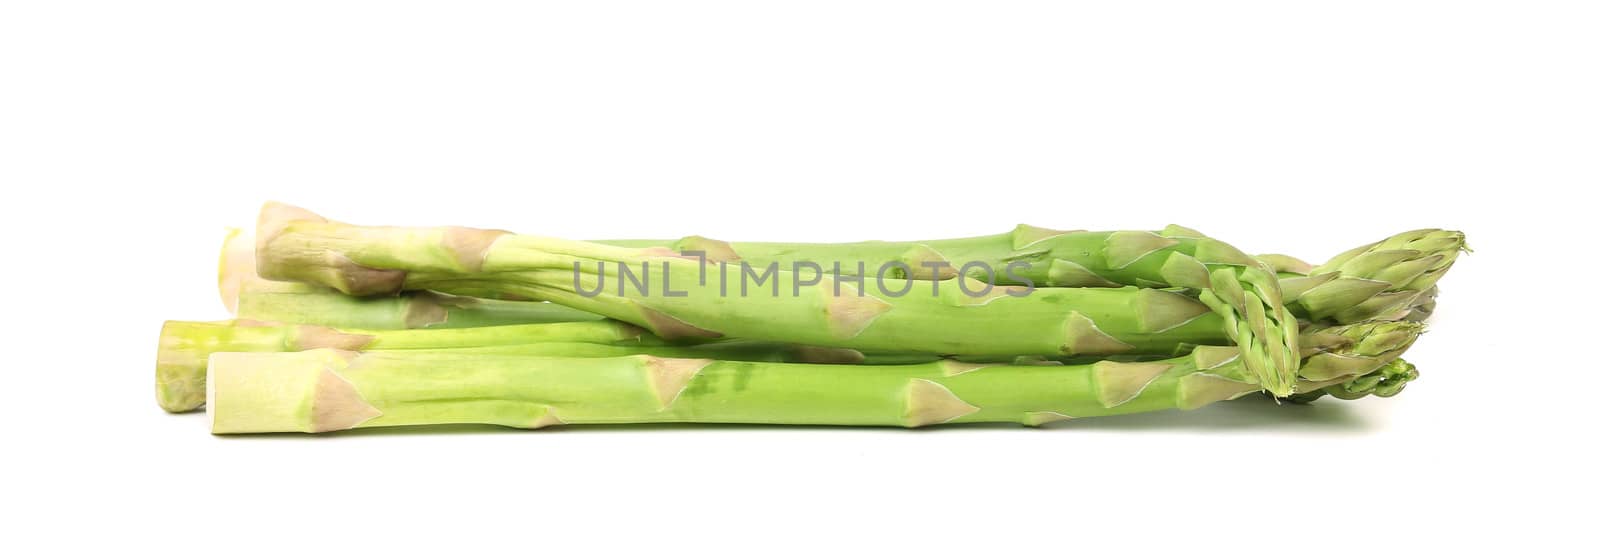 Bunch of asparagus. Isolated on a white background.